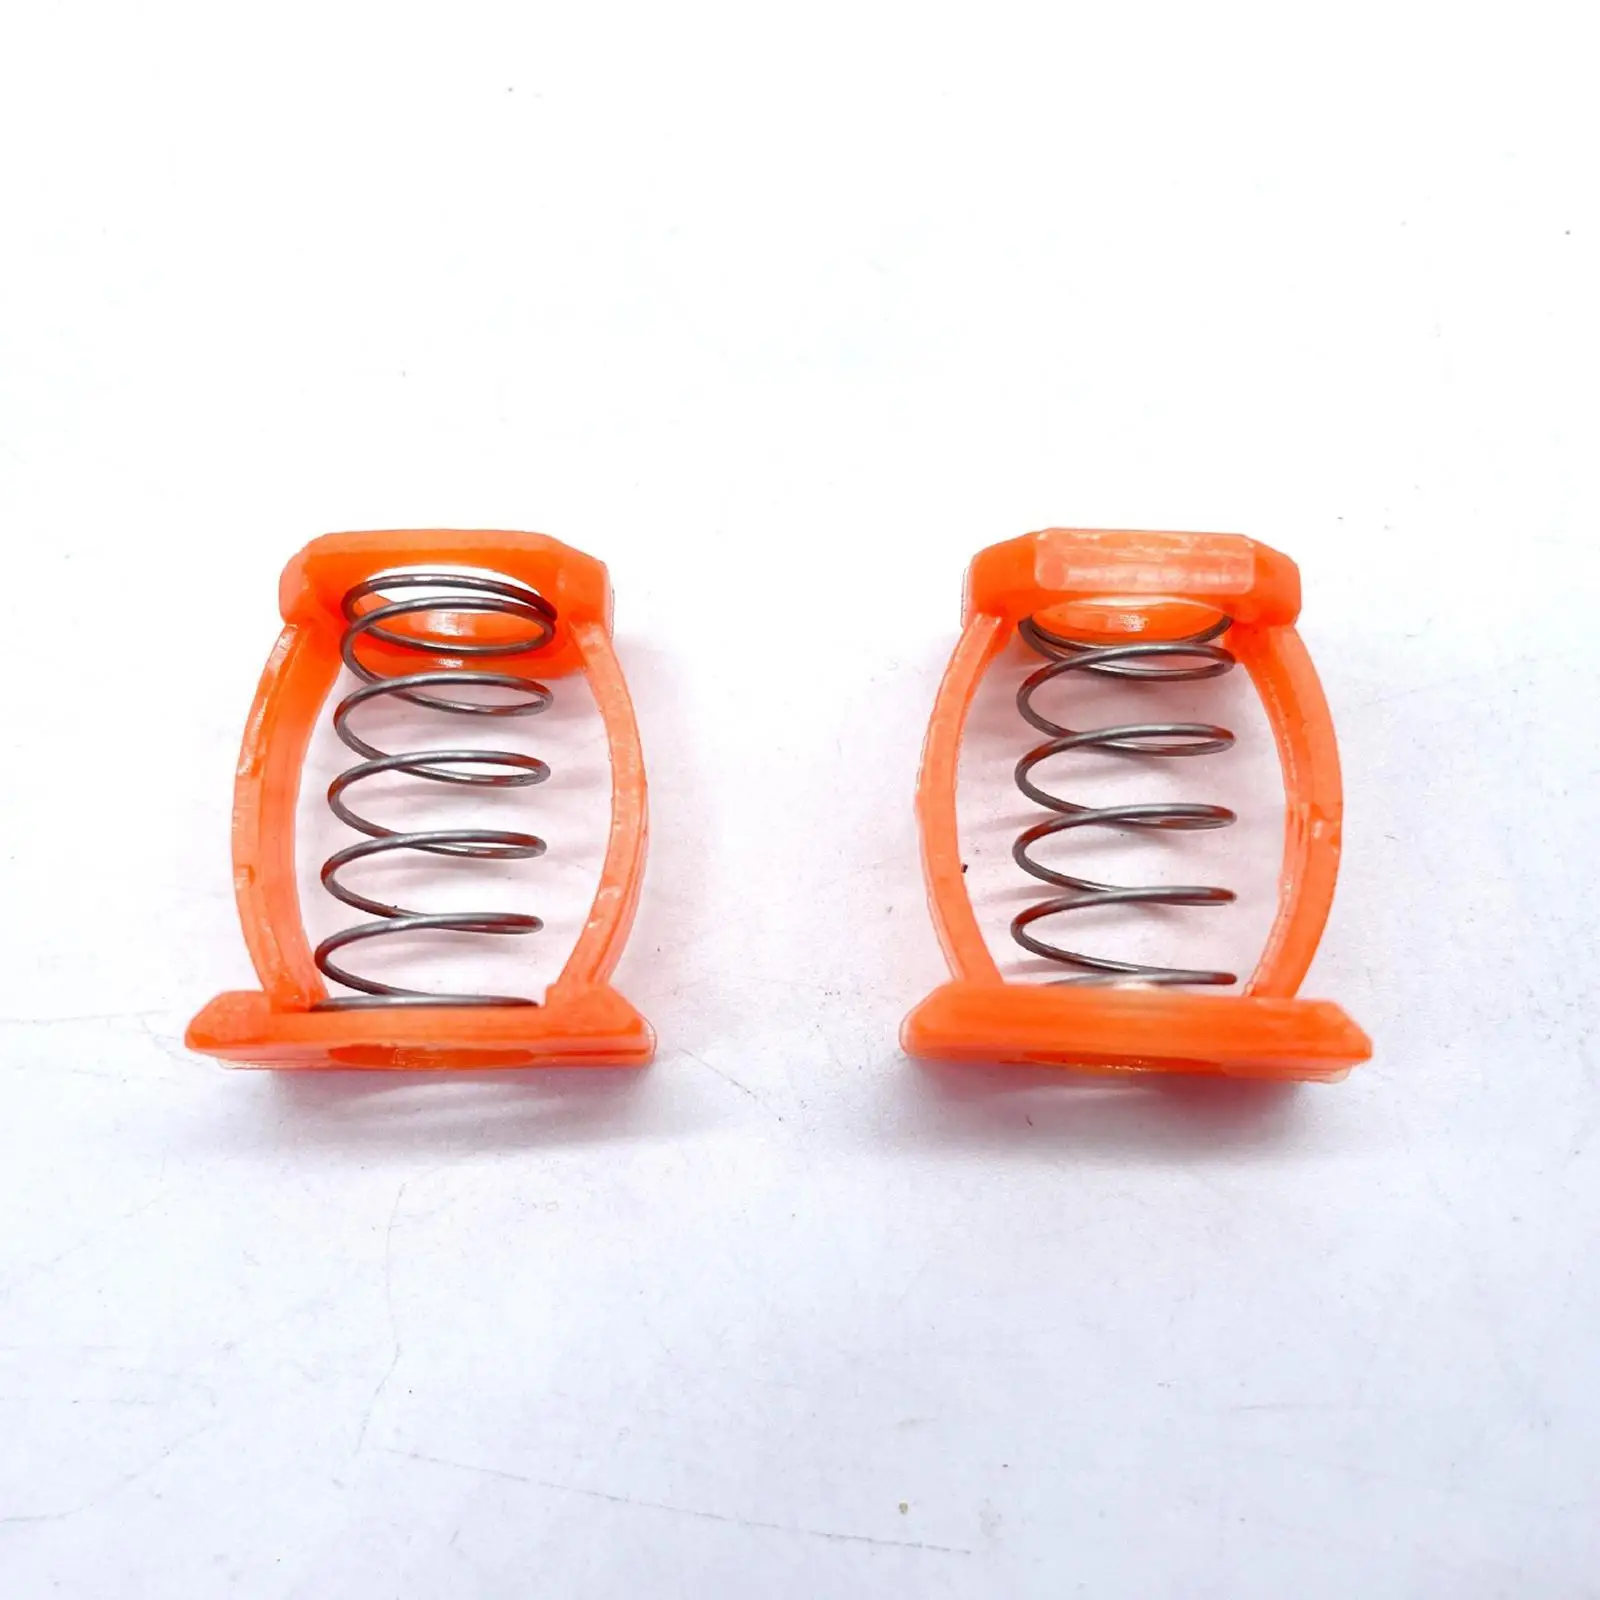 2x Lightweight Folding Bike Hinge Clamp Spring, Cycling C Buckle Lever Fixed Spring Replacement Equipment